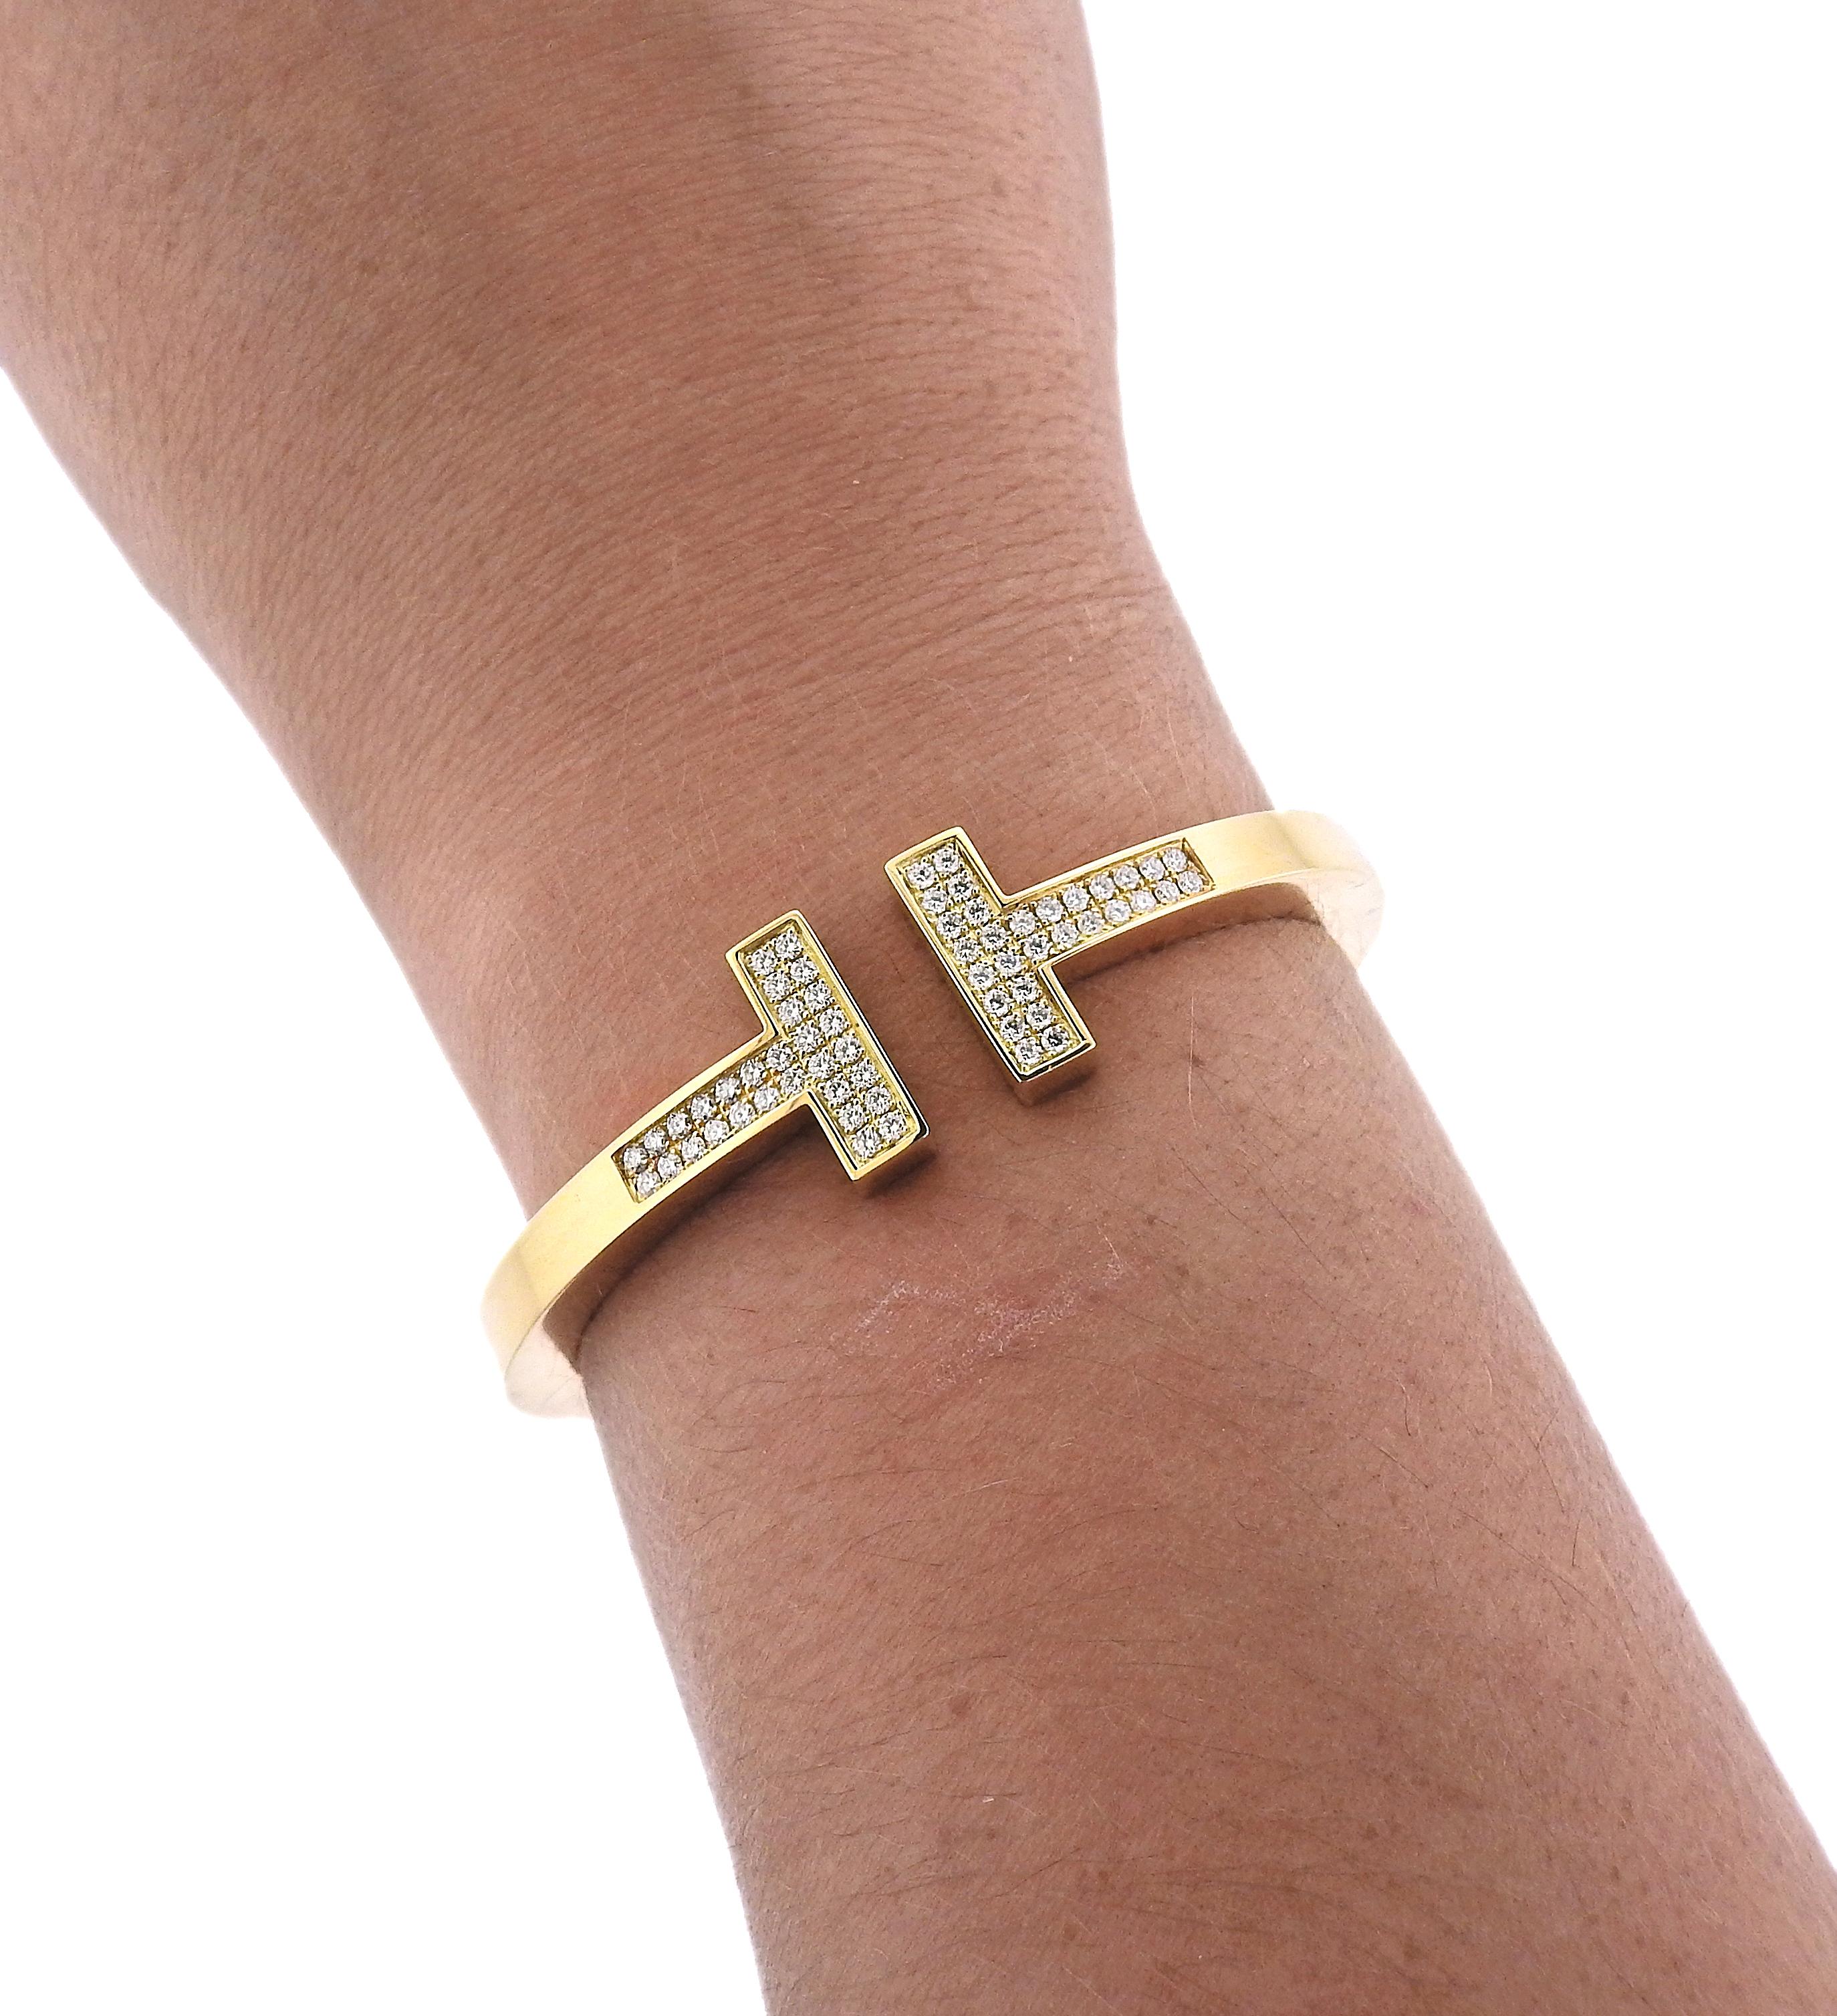 Iconic T bracelet by Tiffany & Co, in 18k yellow gold, with approx. 0.74ctw in G/VS diamonds. Retail $13500. Comes with T & Co box. Bracelet is Tiffany & Co size small. Will fit up to a 6